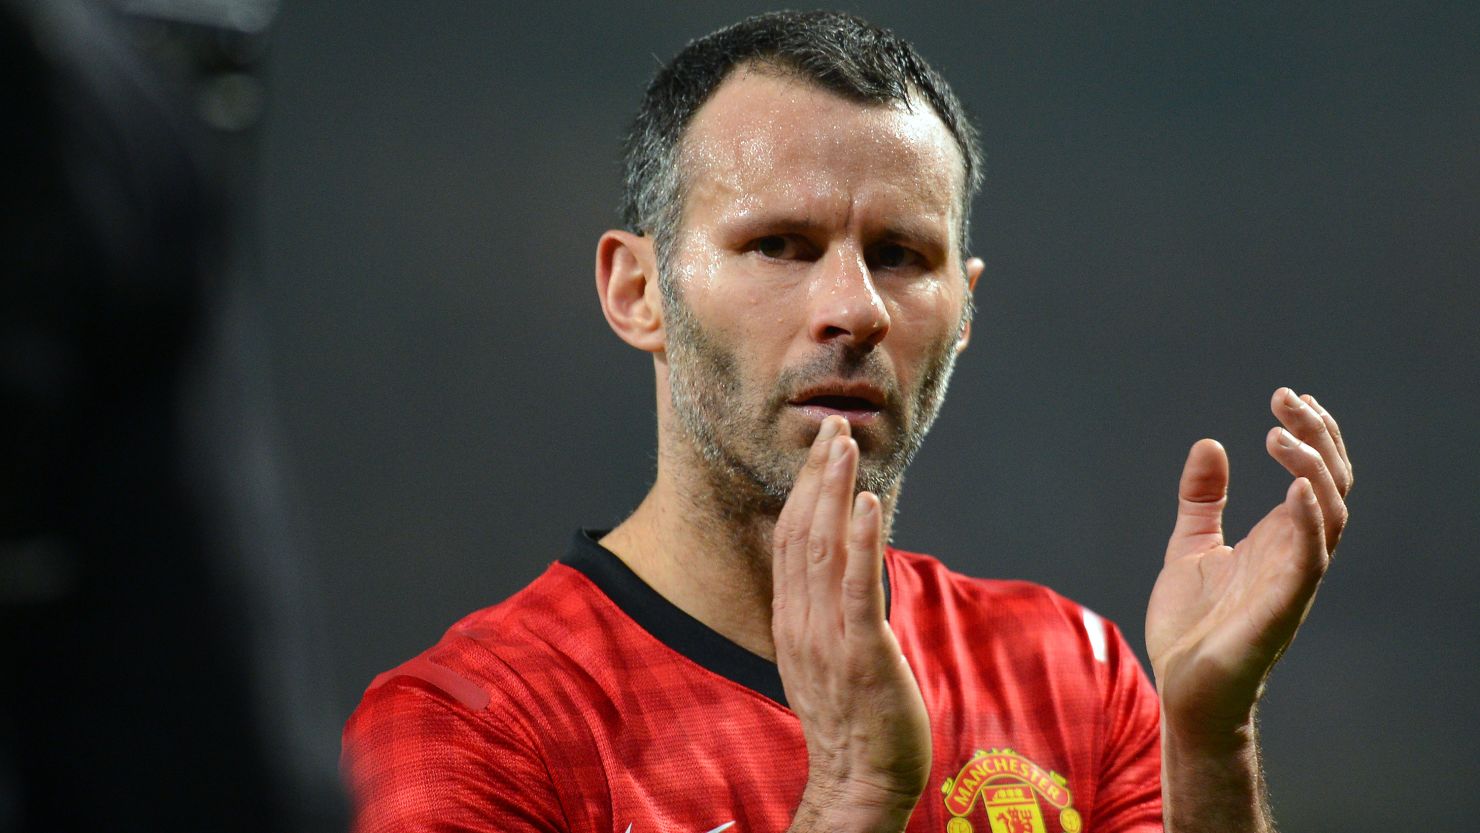 Welshman Ryan Giggs made his debut for Manchester United in 1990.